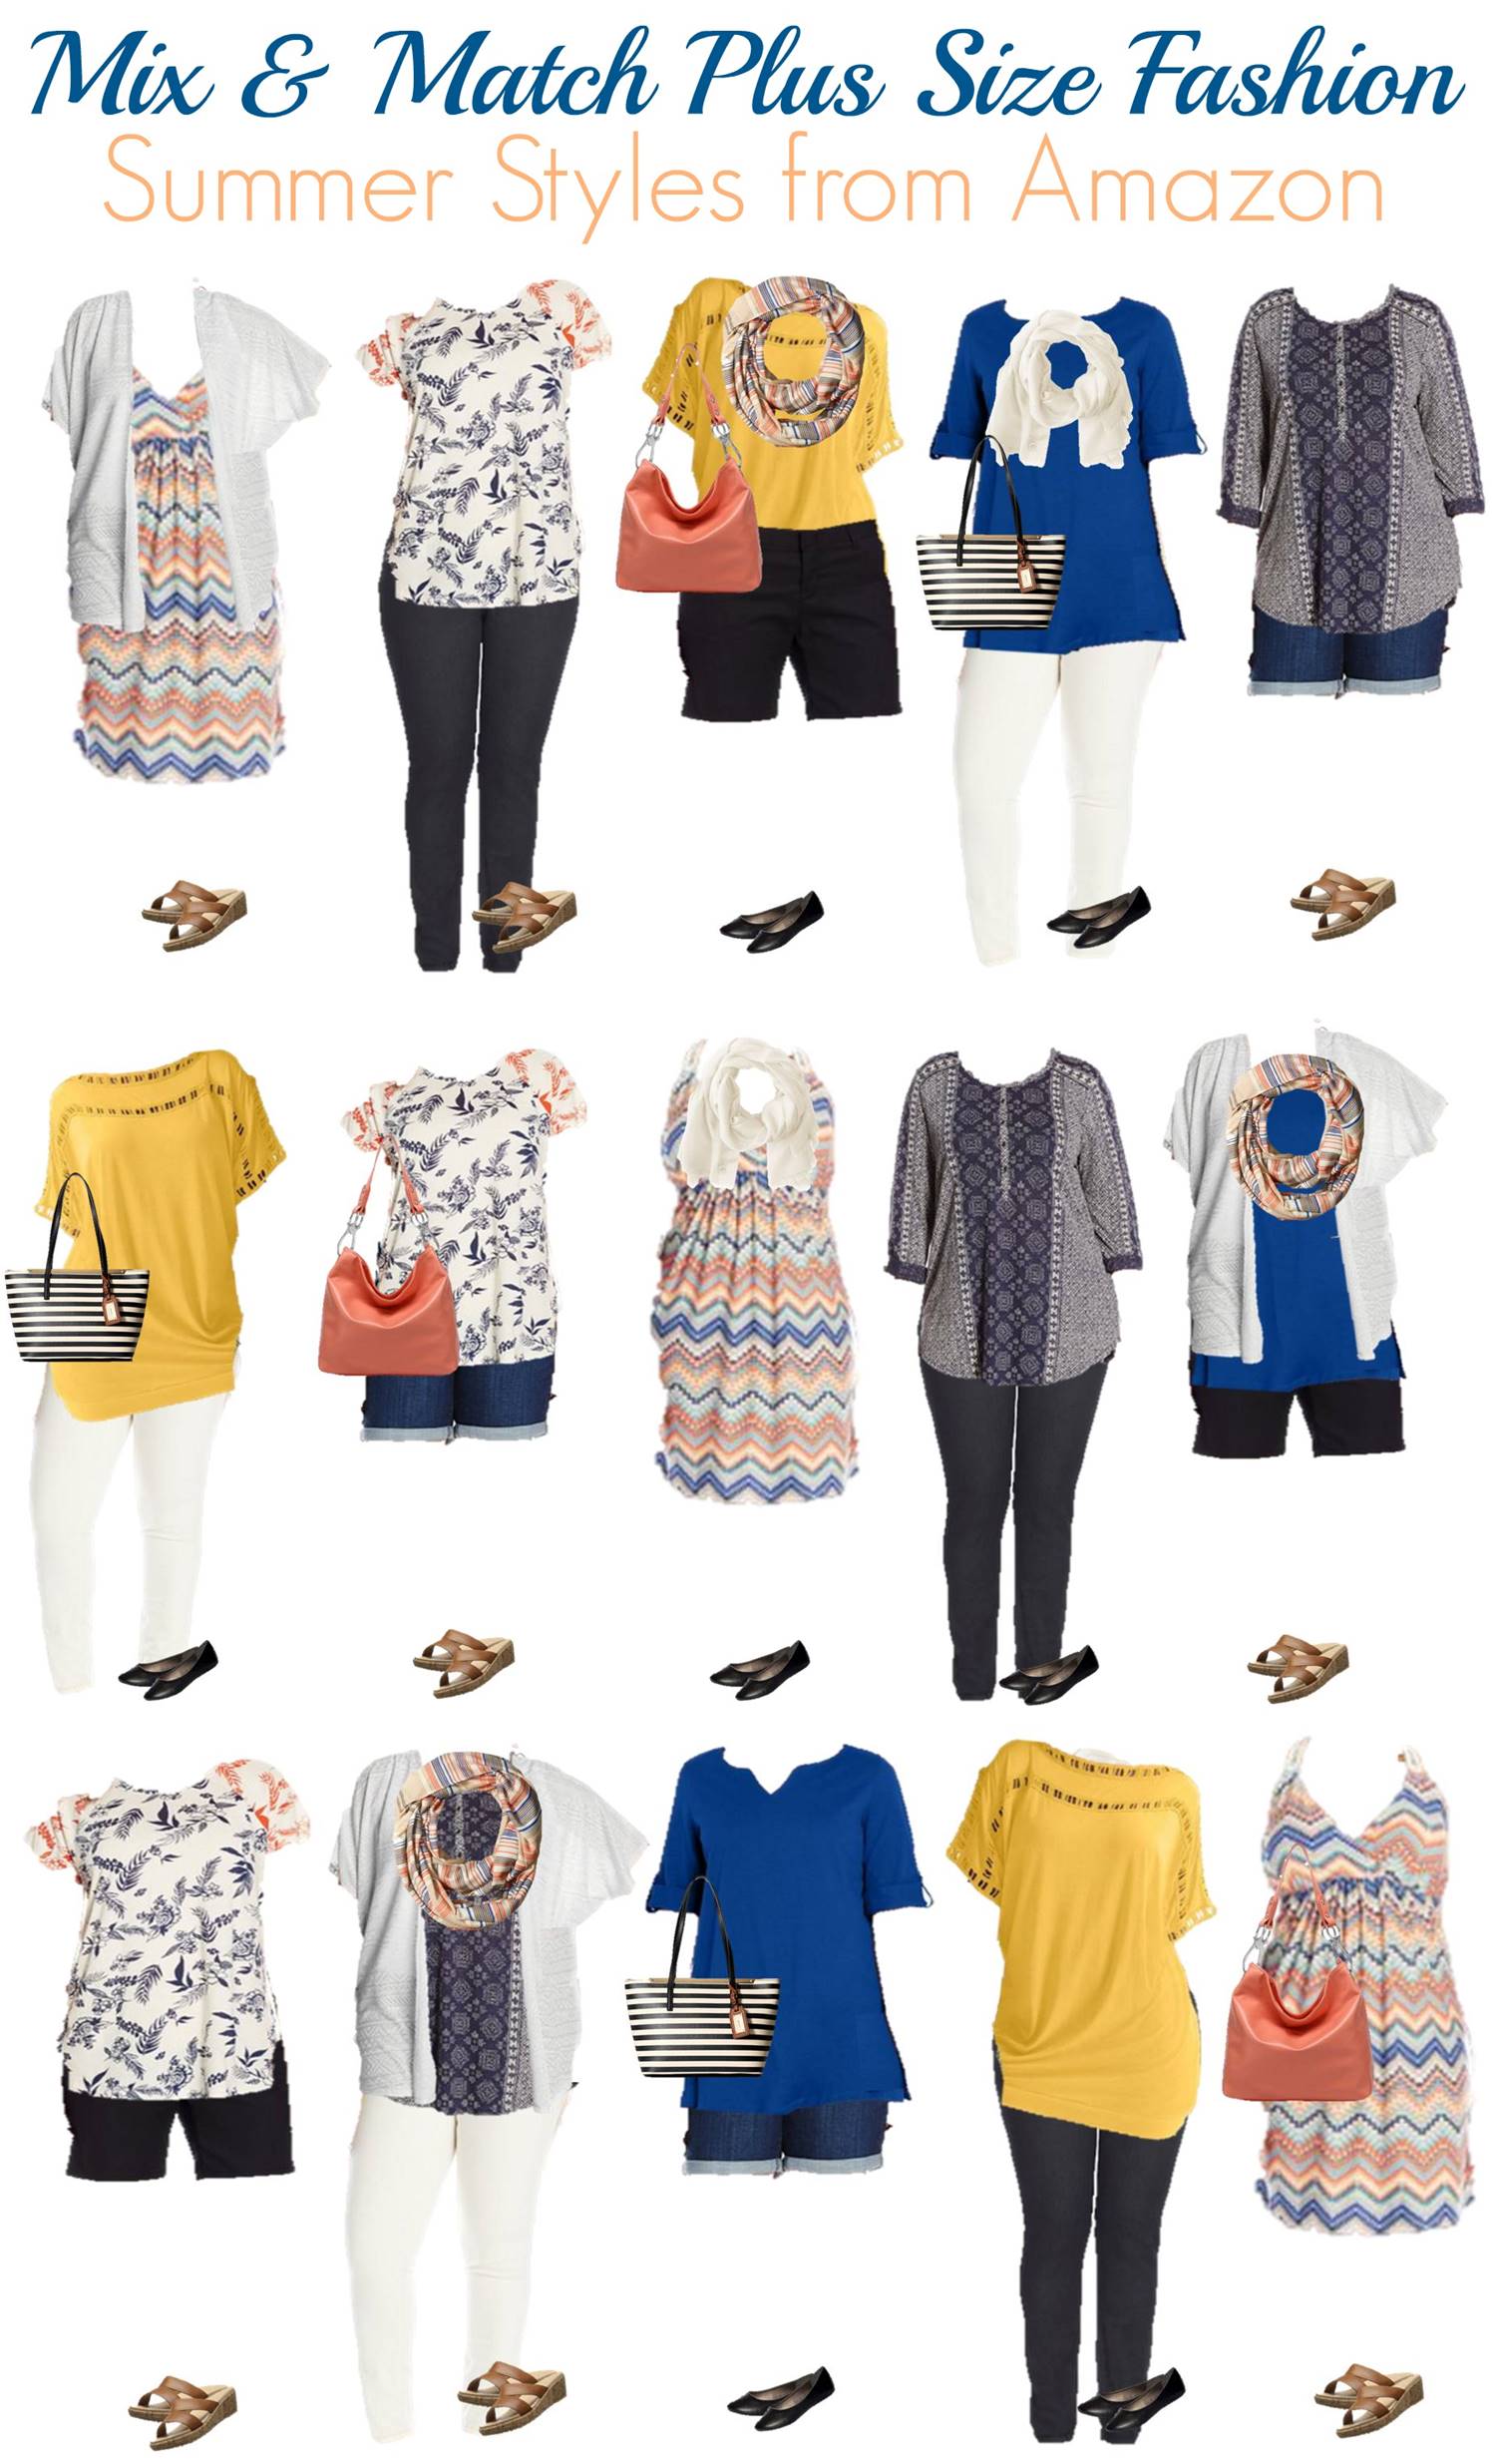 Women's Mix & Match Plus Size Summer Styles from Amazon